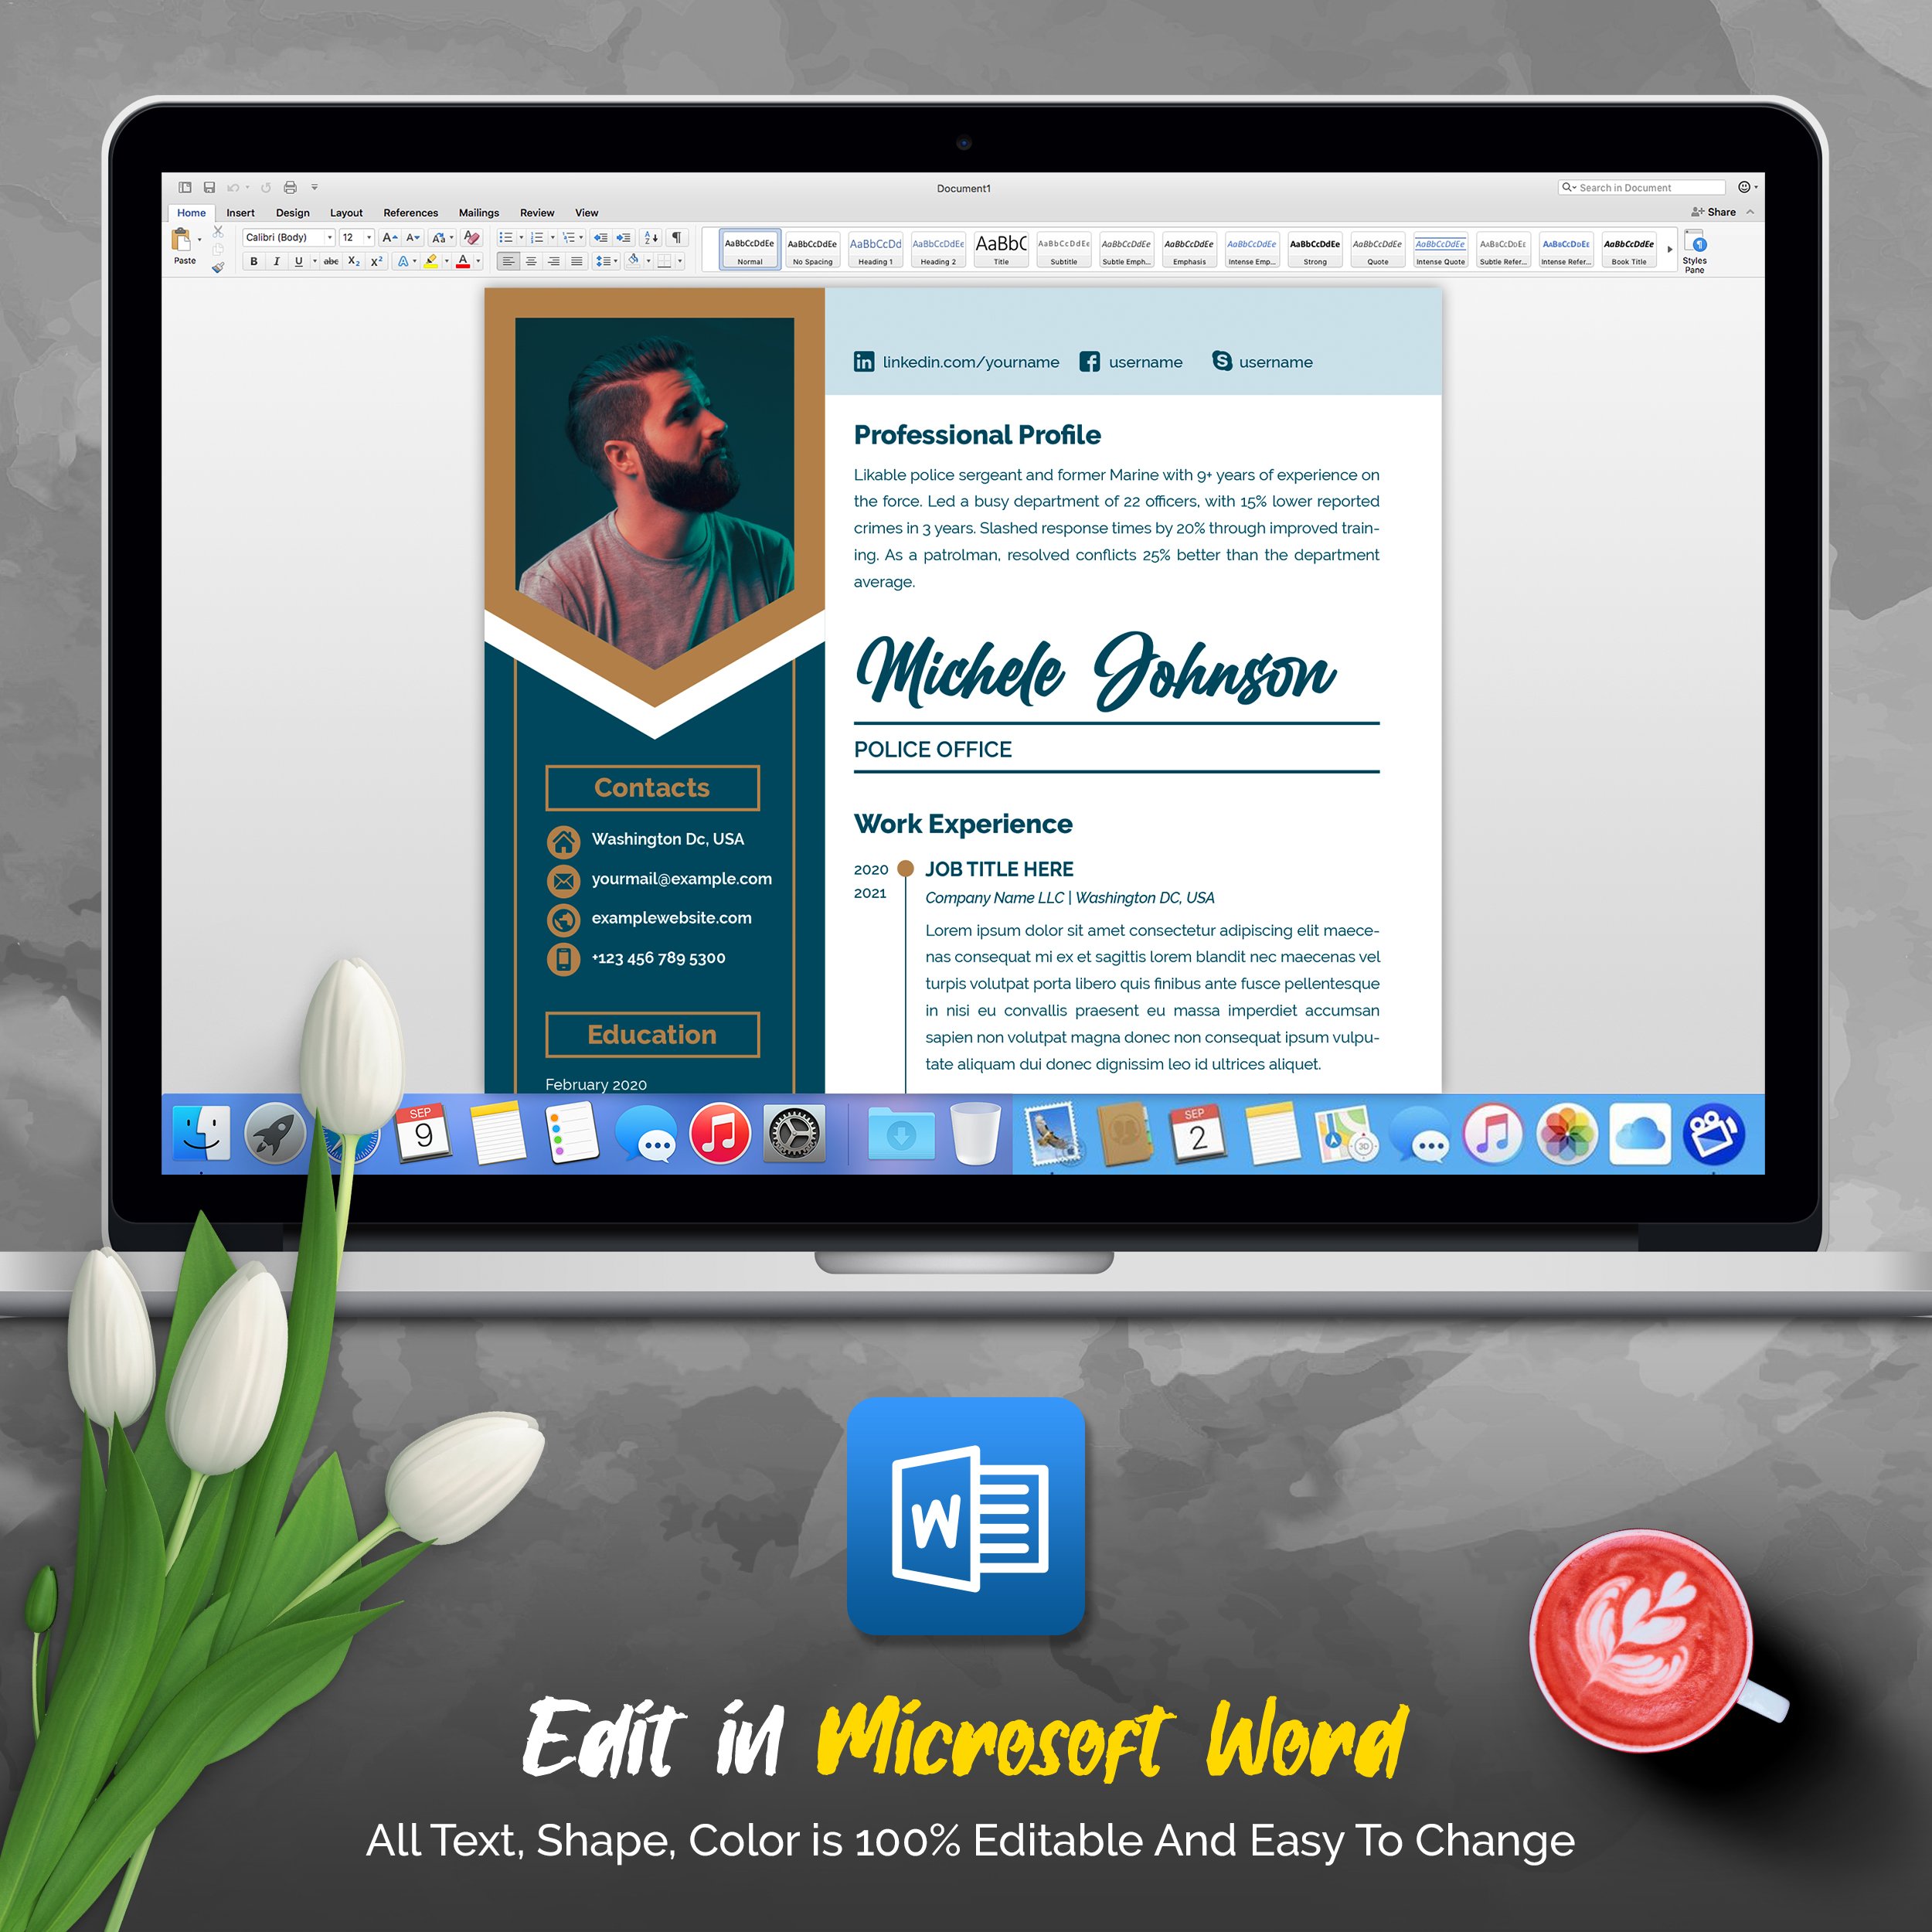 04 4 pages professional ms word aple pages eps photoshop psd resume cv design template design by resume inventor 181